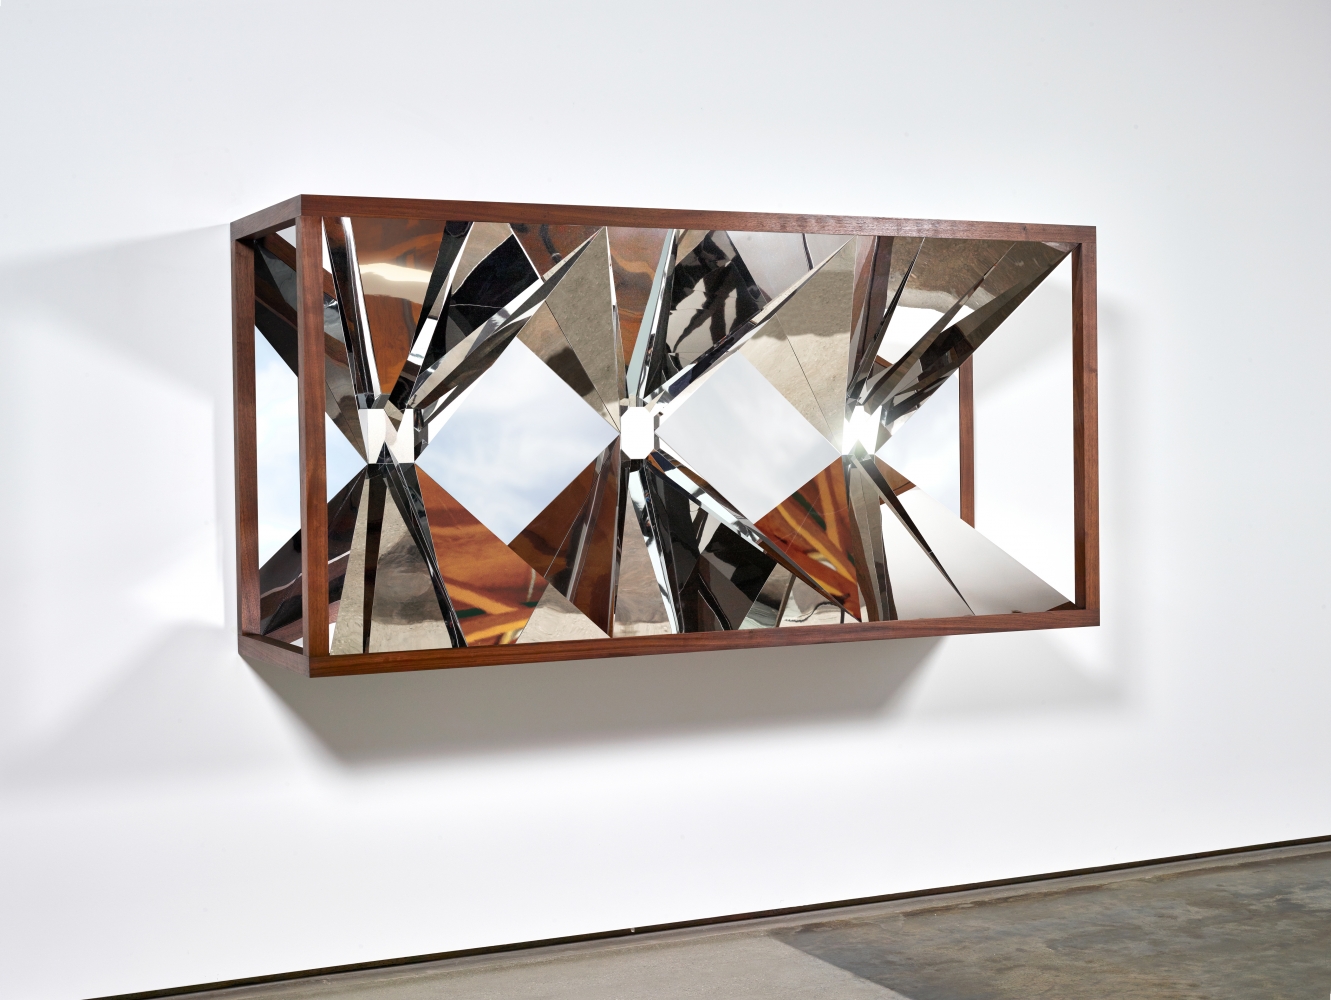 Doug Aitken

NOW (dark wood)

2016

Wood, polished stainless steel, aluminum

44 7/8 x 91 1/4 x 26 3/8 inches (114 x 231.8 x 67 cm)

Variation&amp;nbsp;of 4, with 2 AP

DA 554

&amp;nbsp;

INQUIRE